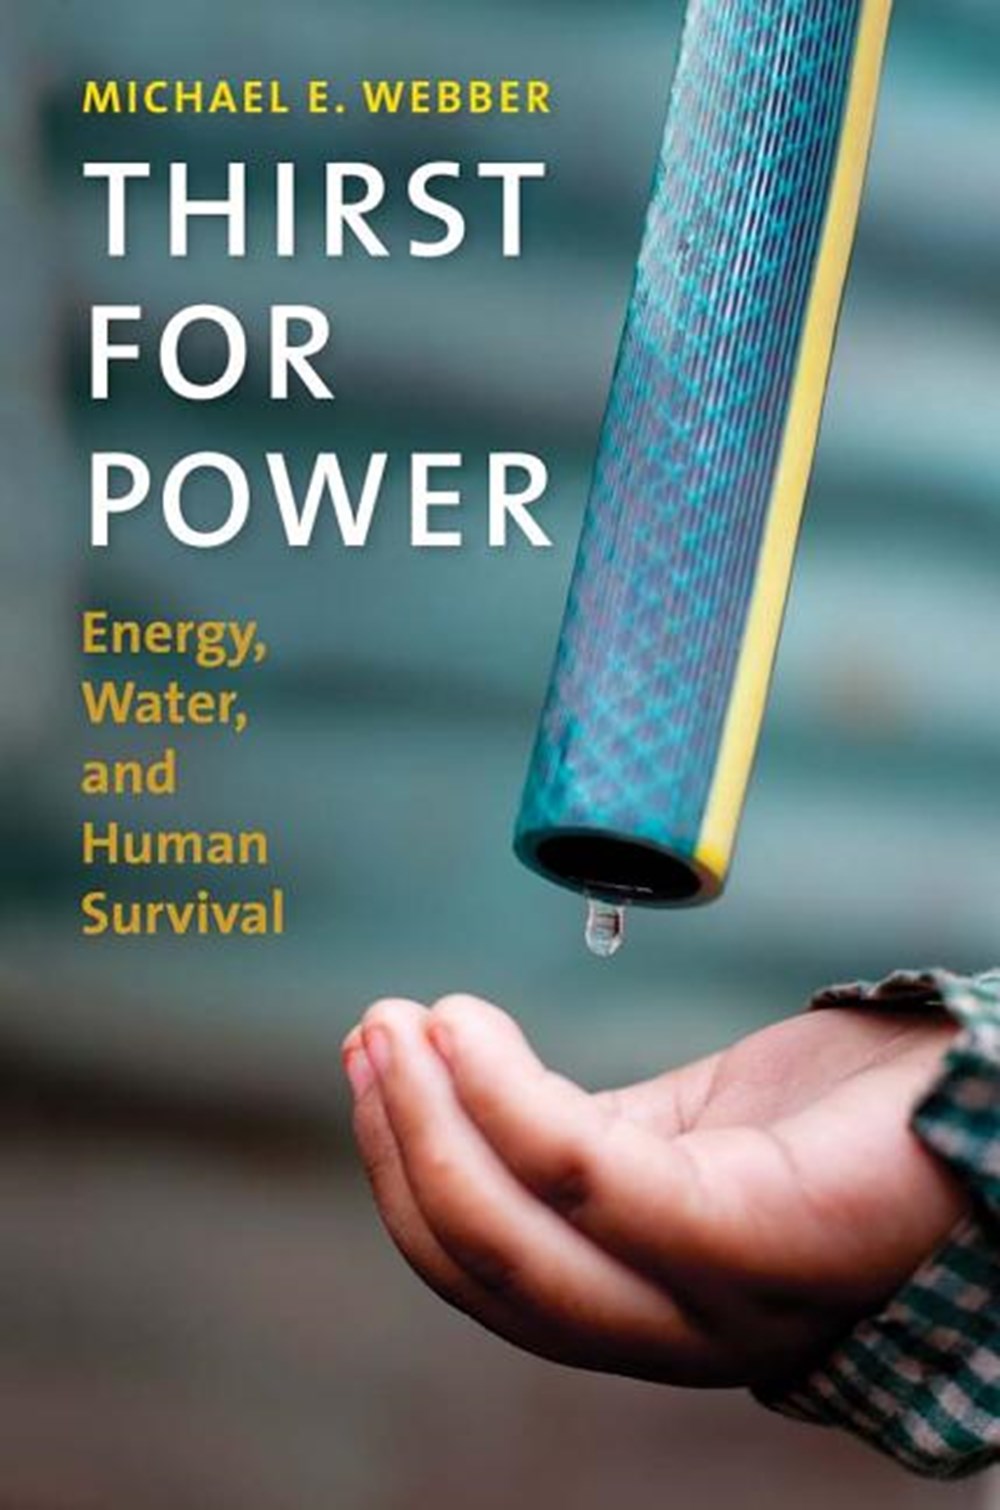 Thirst for Power Energy, Water, and Human Survival